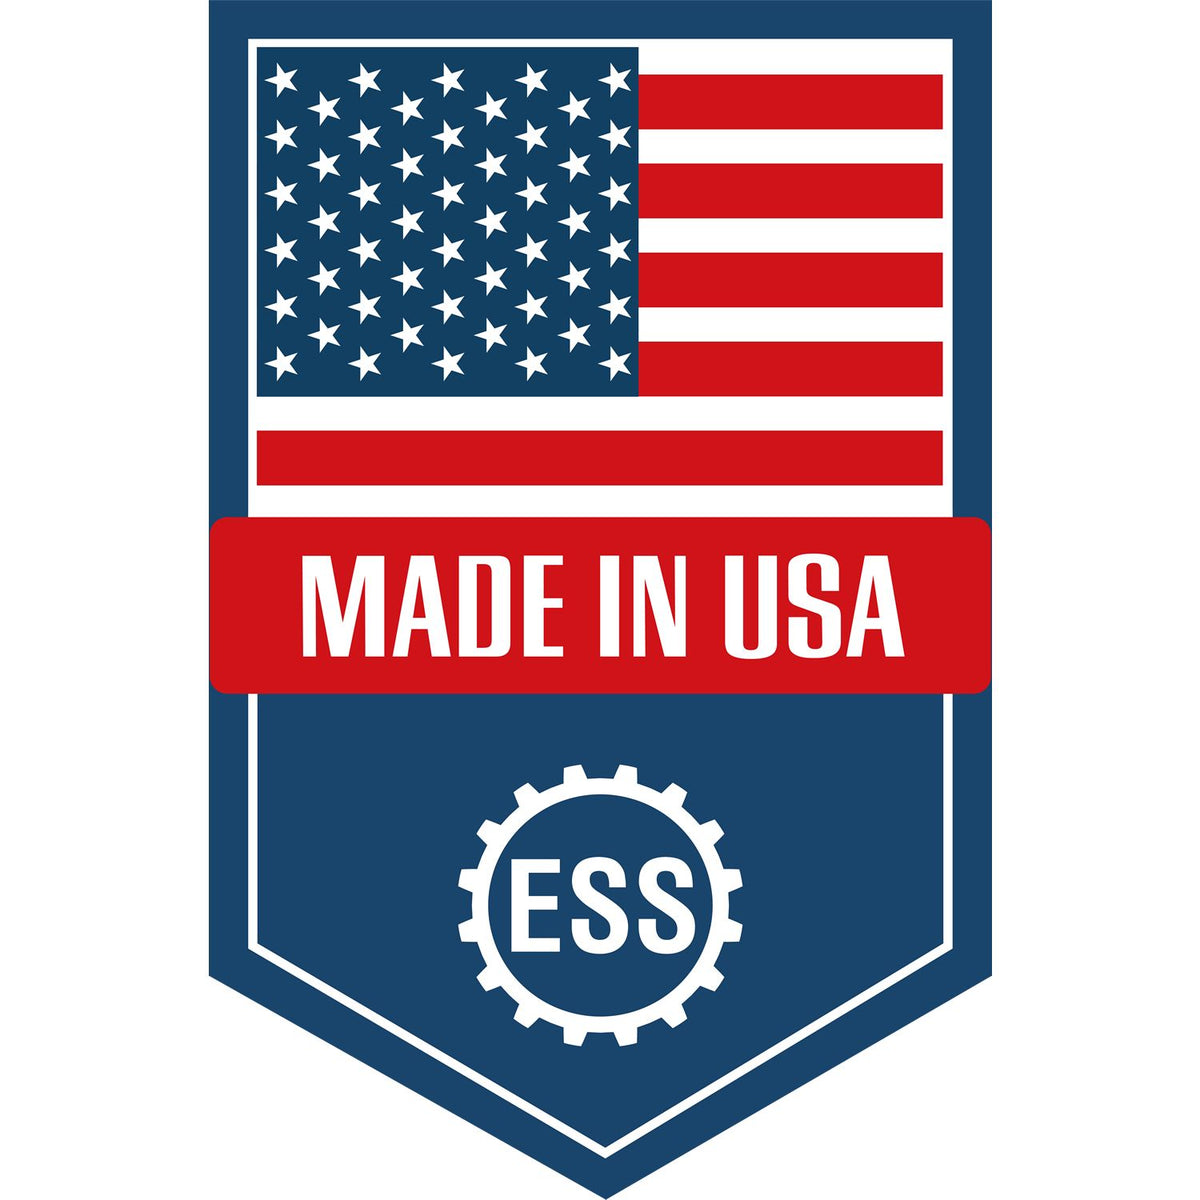 An icon or graphic with an American flag and text reading Made in USA for the Gift Washington Landscape Architect Seal